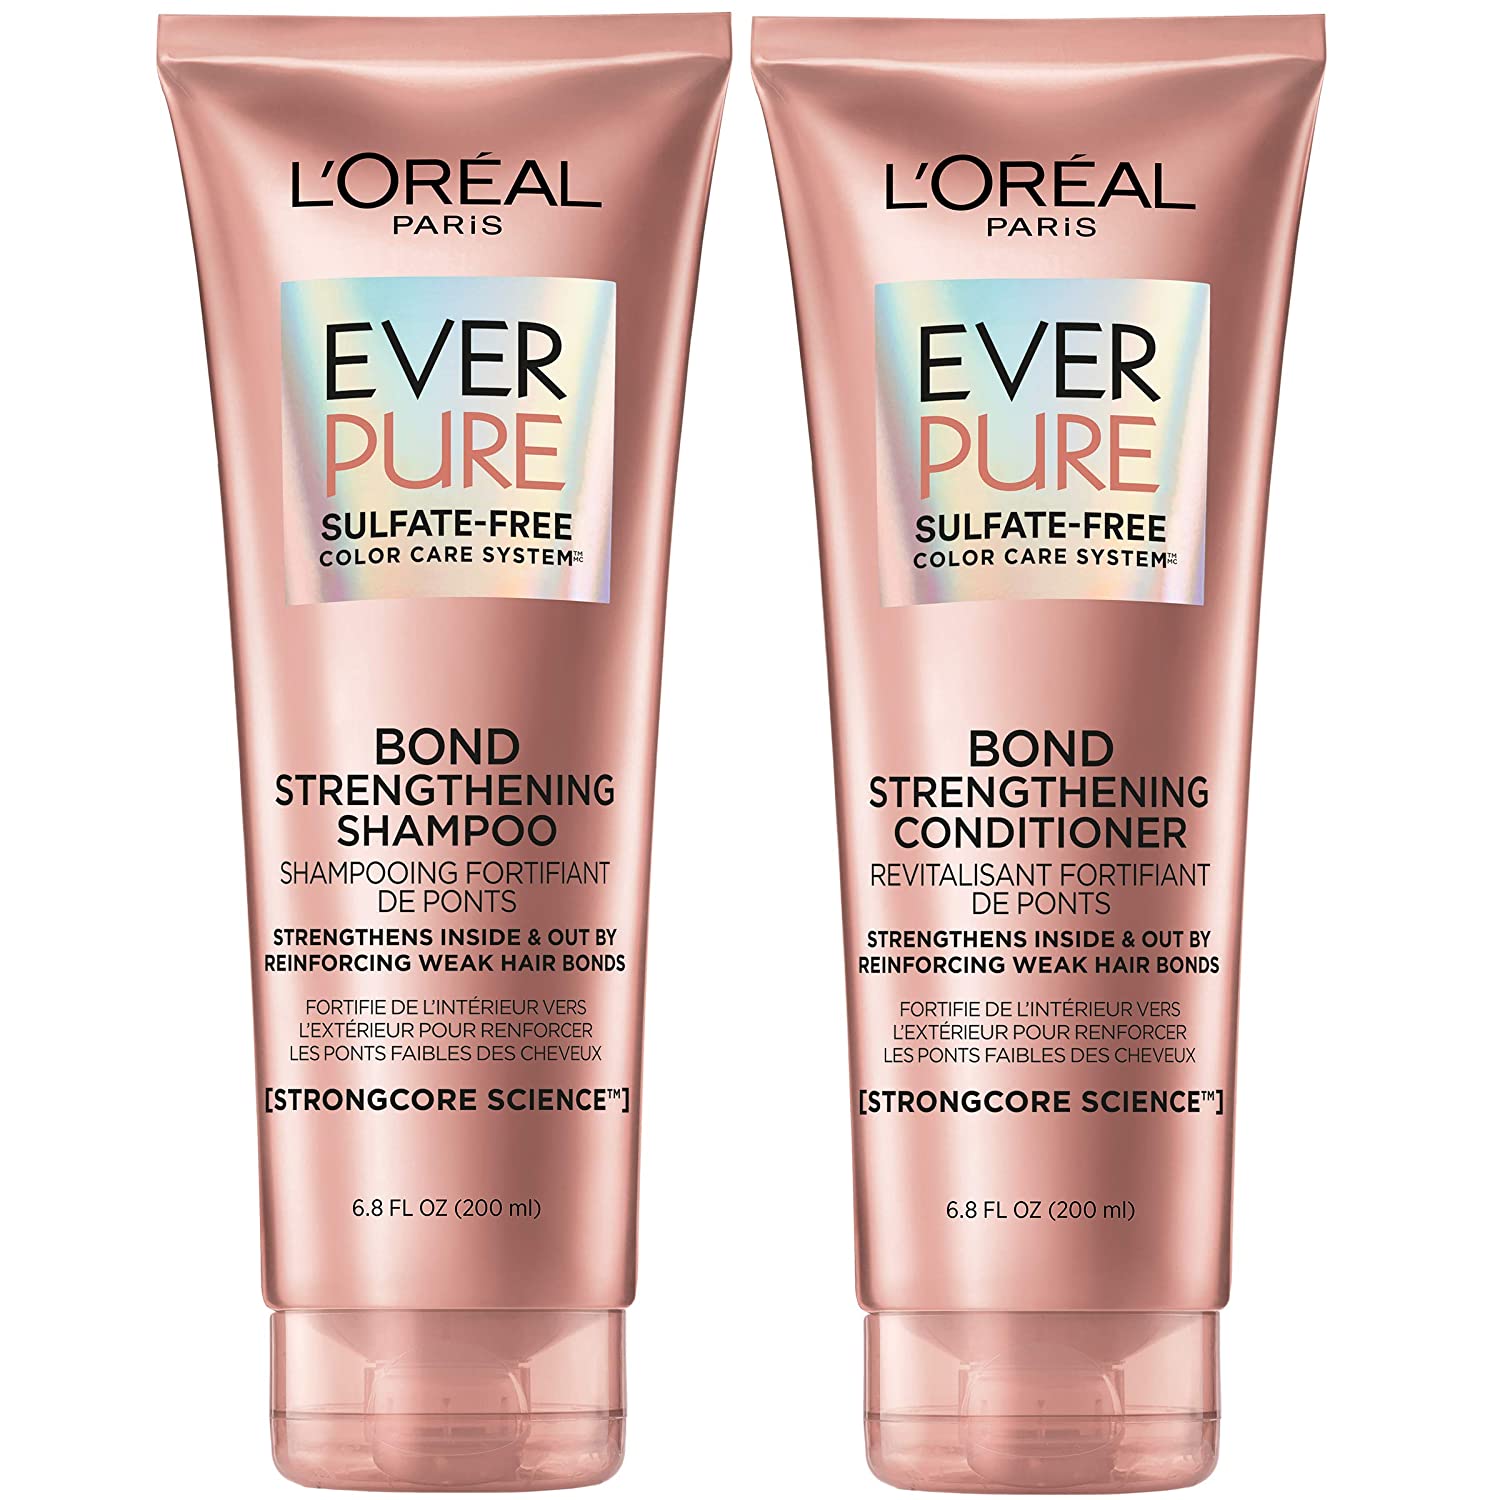 6.8-Oz L'Oreal Paris EverPure Bonding Shampoo and Conditioner Kit $10.48 w/ S&S + Free Shipping w/ Prime or Orders $25+